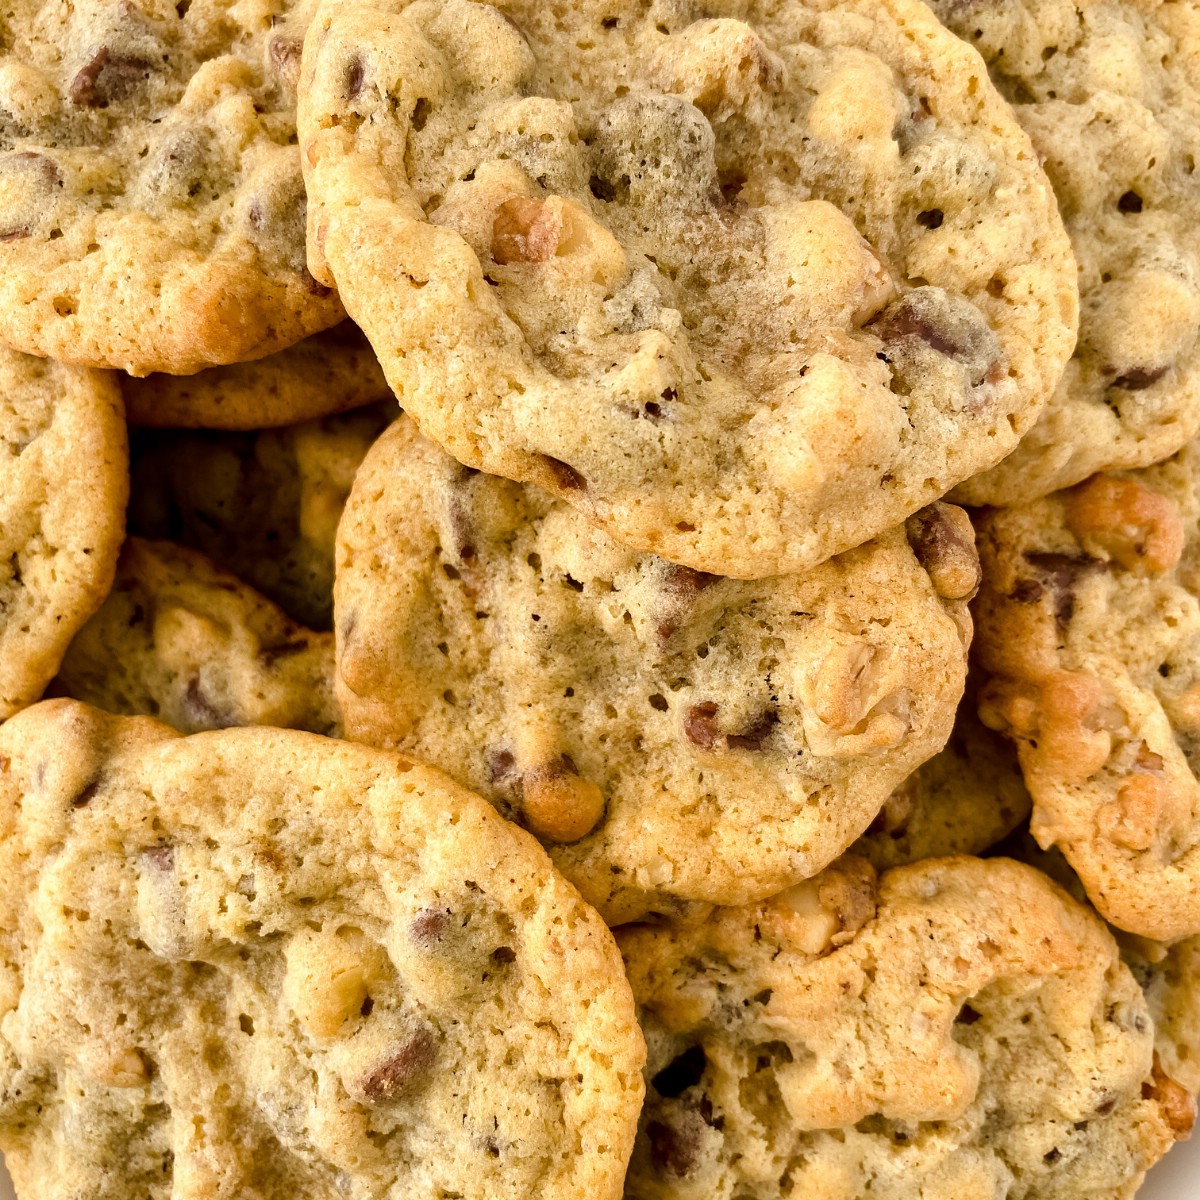 Close up image of DoubleTree copycat cookies stacked together